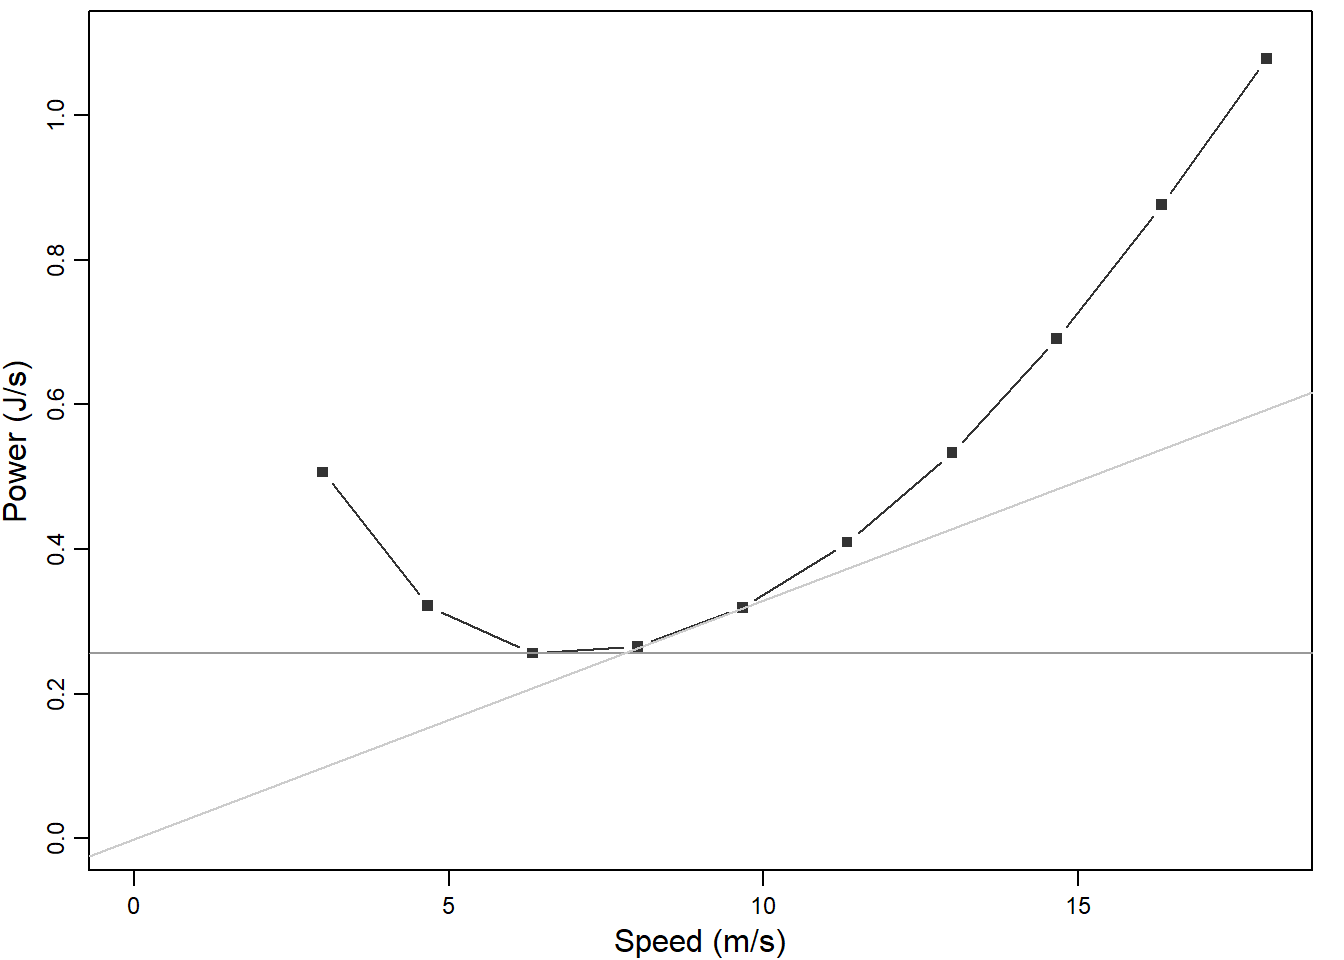 Mechanical power of flight in relation to flight speed for a hypothetical Robin *Erithacus rubecula*. Minimum power speed is the speed at which the power curve reaches its minimum (speed at which horizontal line touches the power curve). At the maximum range speed the distance per energy used is maximal (speed at which the tangent from the origin touches the power curve). The power curve is calculated using the R-package afpt